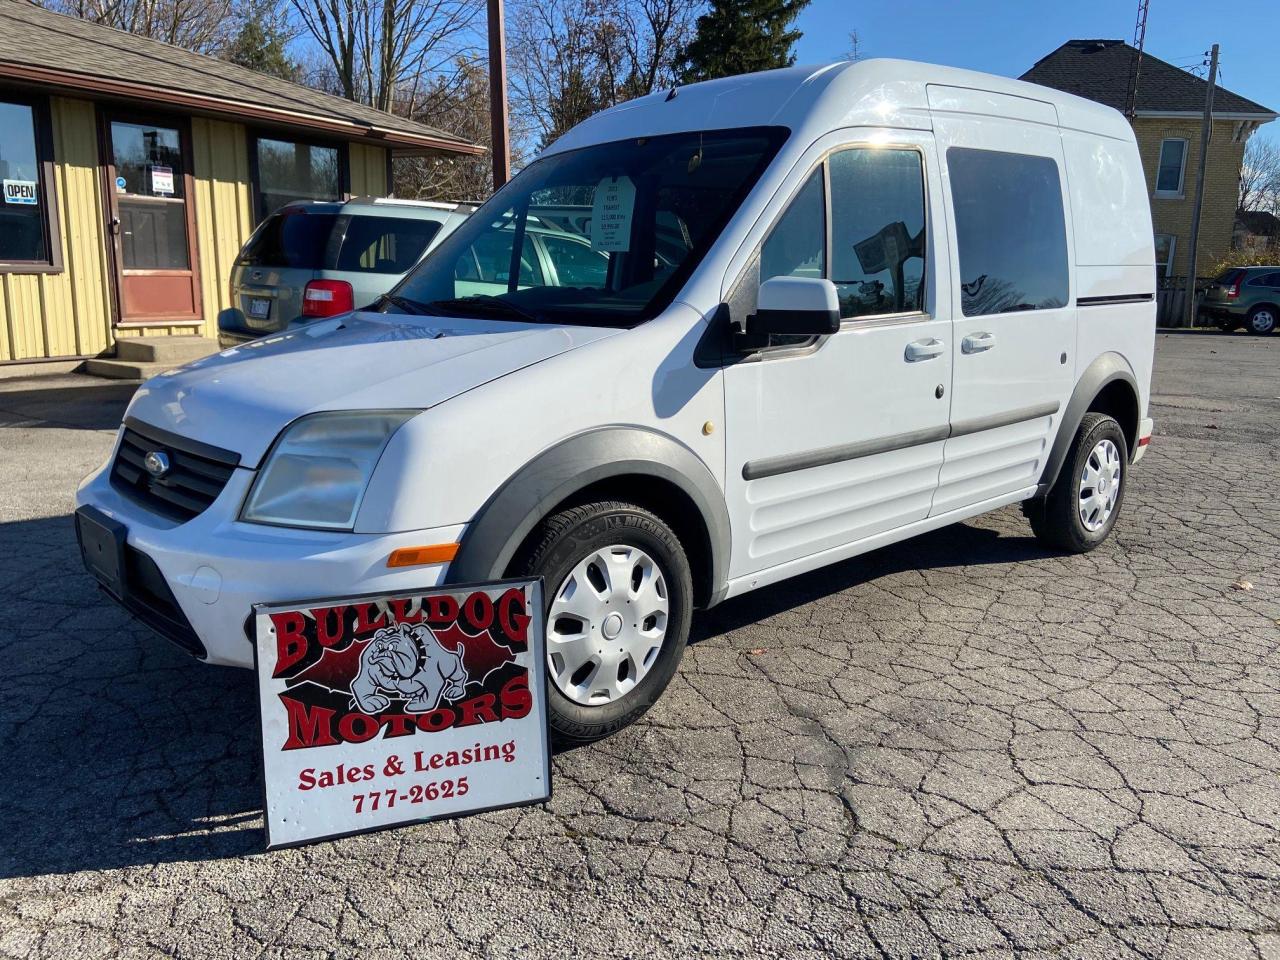 2011 transit connect for sale